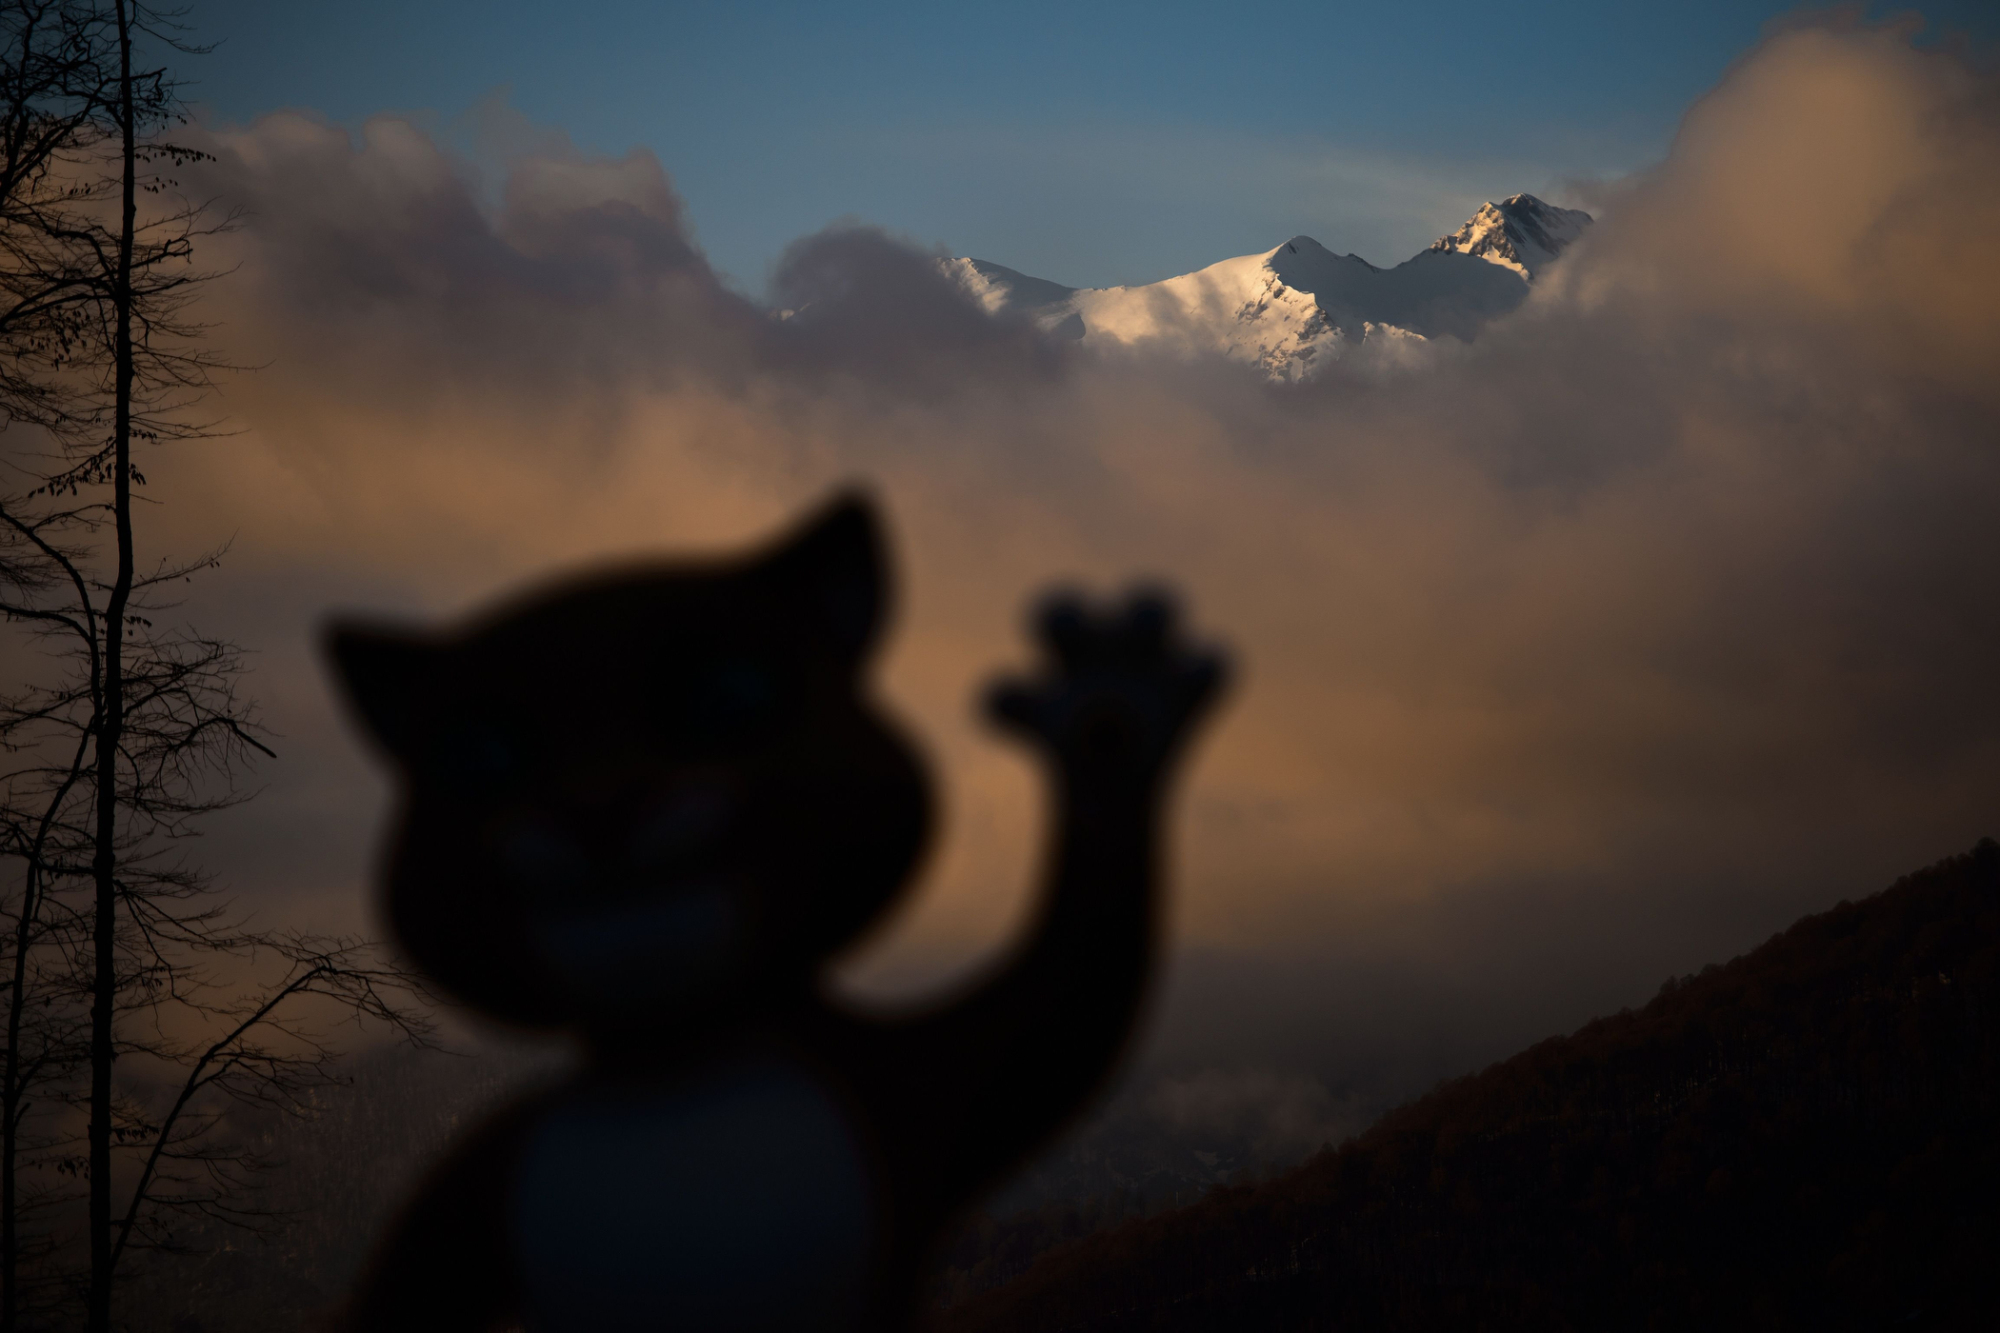 A mascot of Sochi Winter Olympics is seen in silhouette with mountains at sunset at the Mountain athletes village during the Sochi Winter Olympics on Feb. 11, 2014.